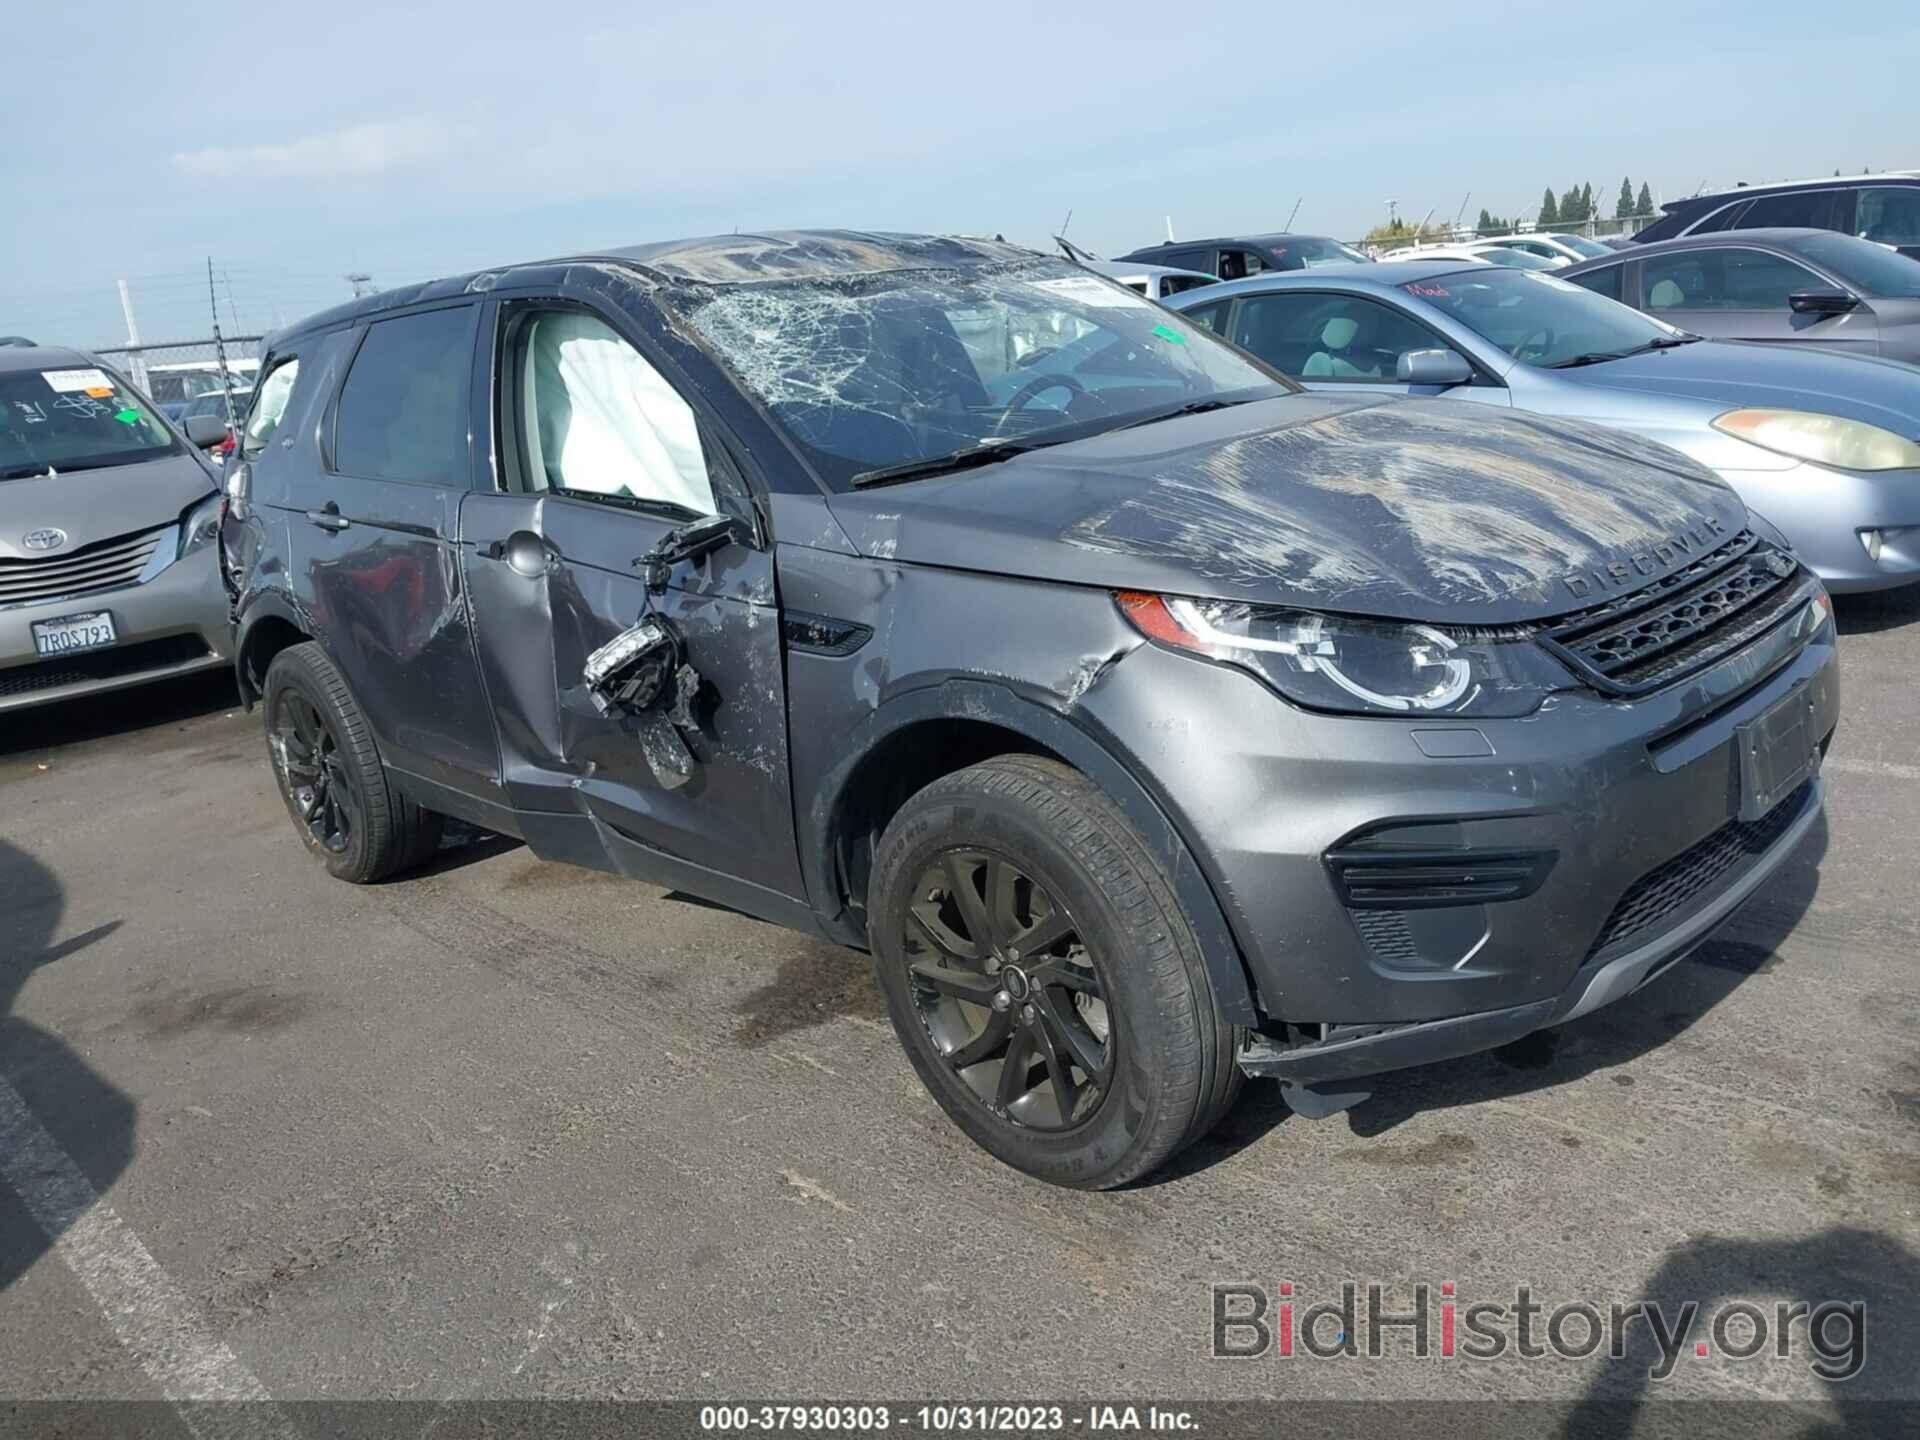 Фотография SALCP2RX6JH723514 - LAND ROVER DISCOVERY SPORT 2018